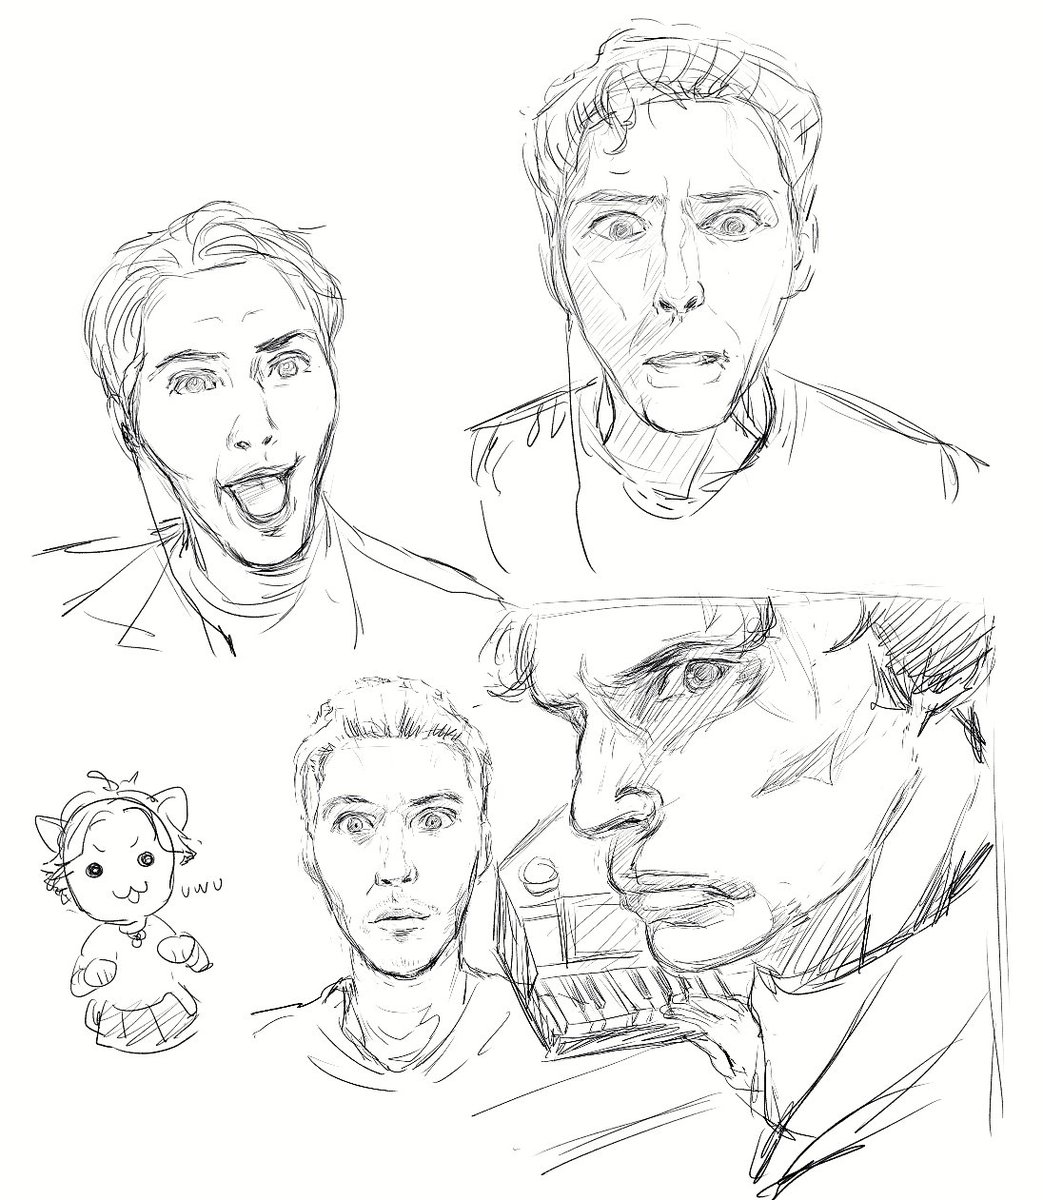 You ever wake up to a really embarrassing drawing you made the night before? Well here's mine... #jerma985 